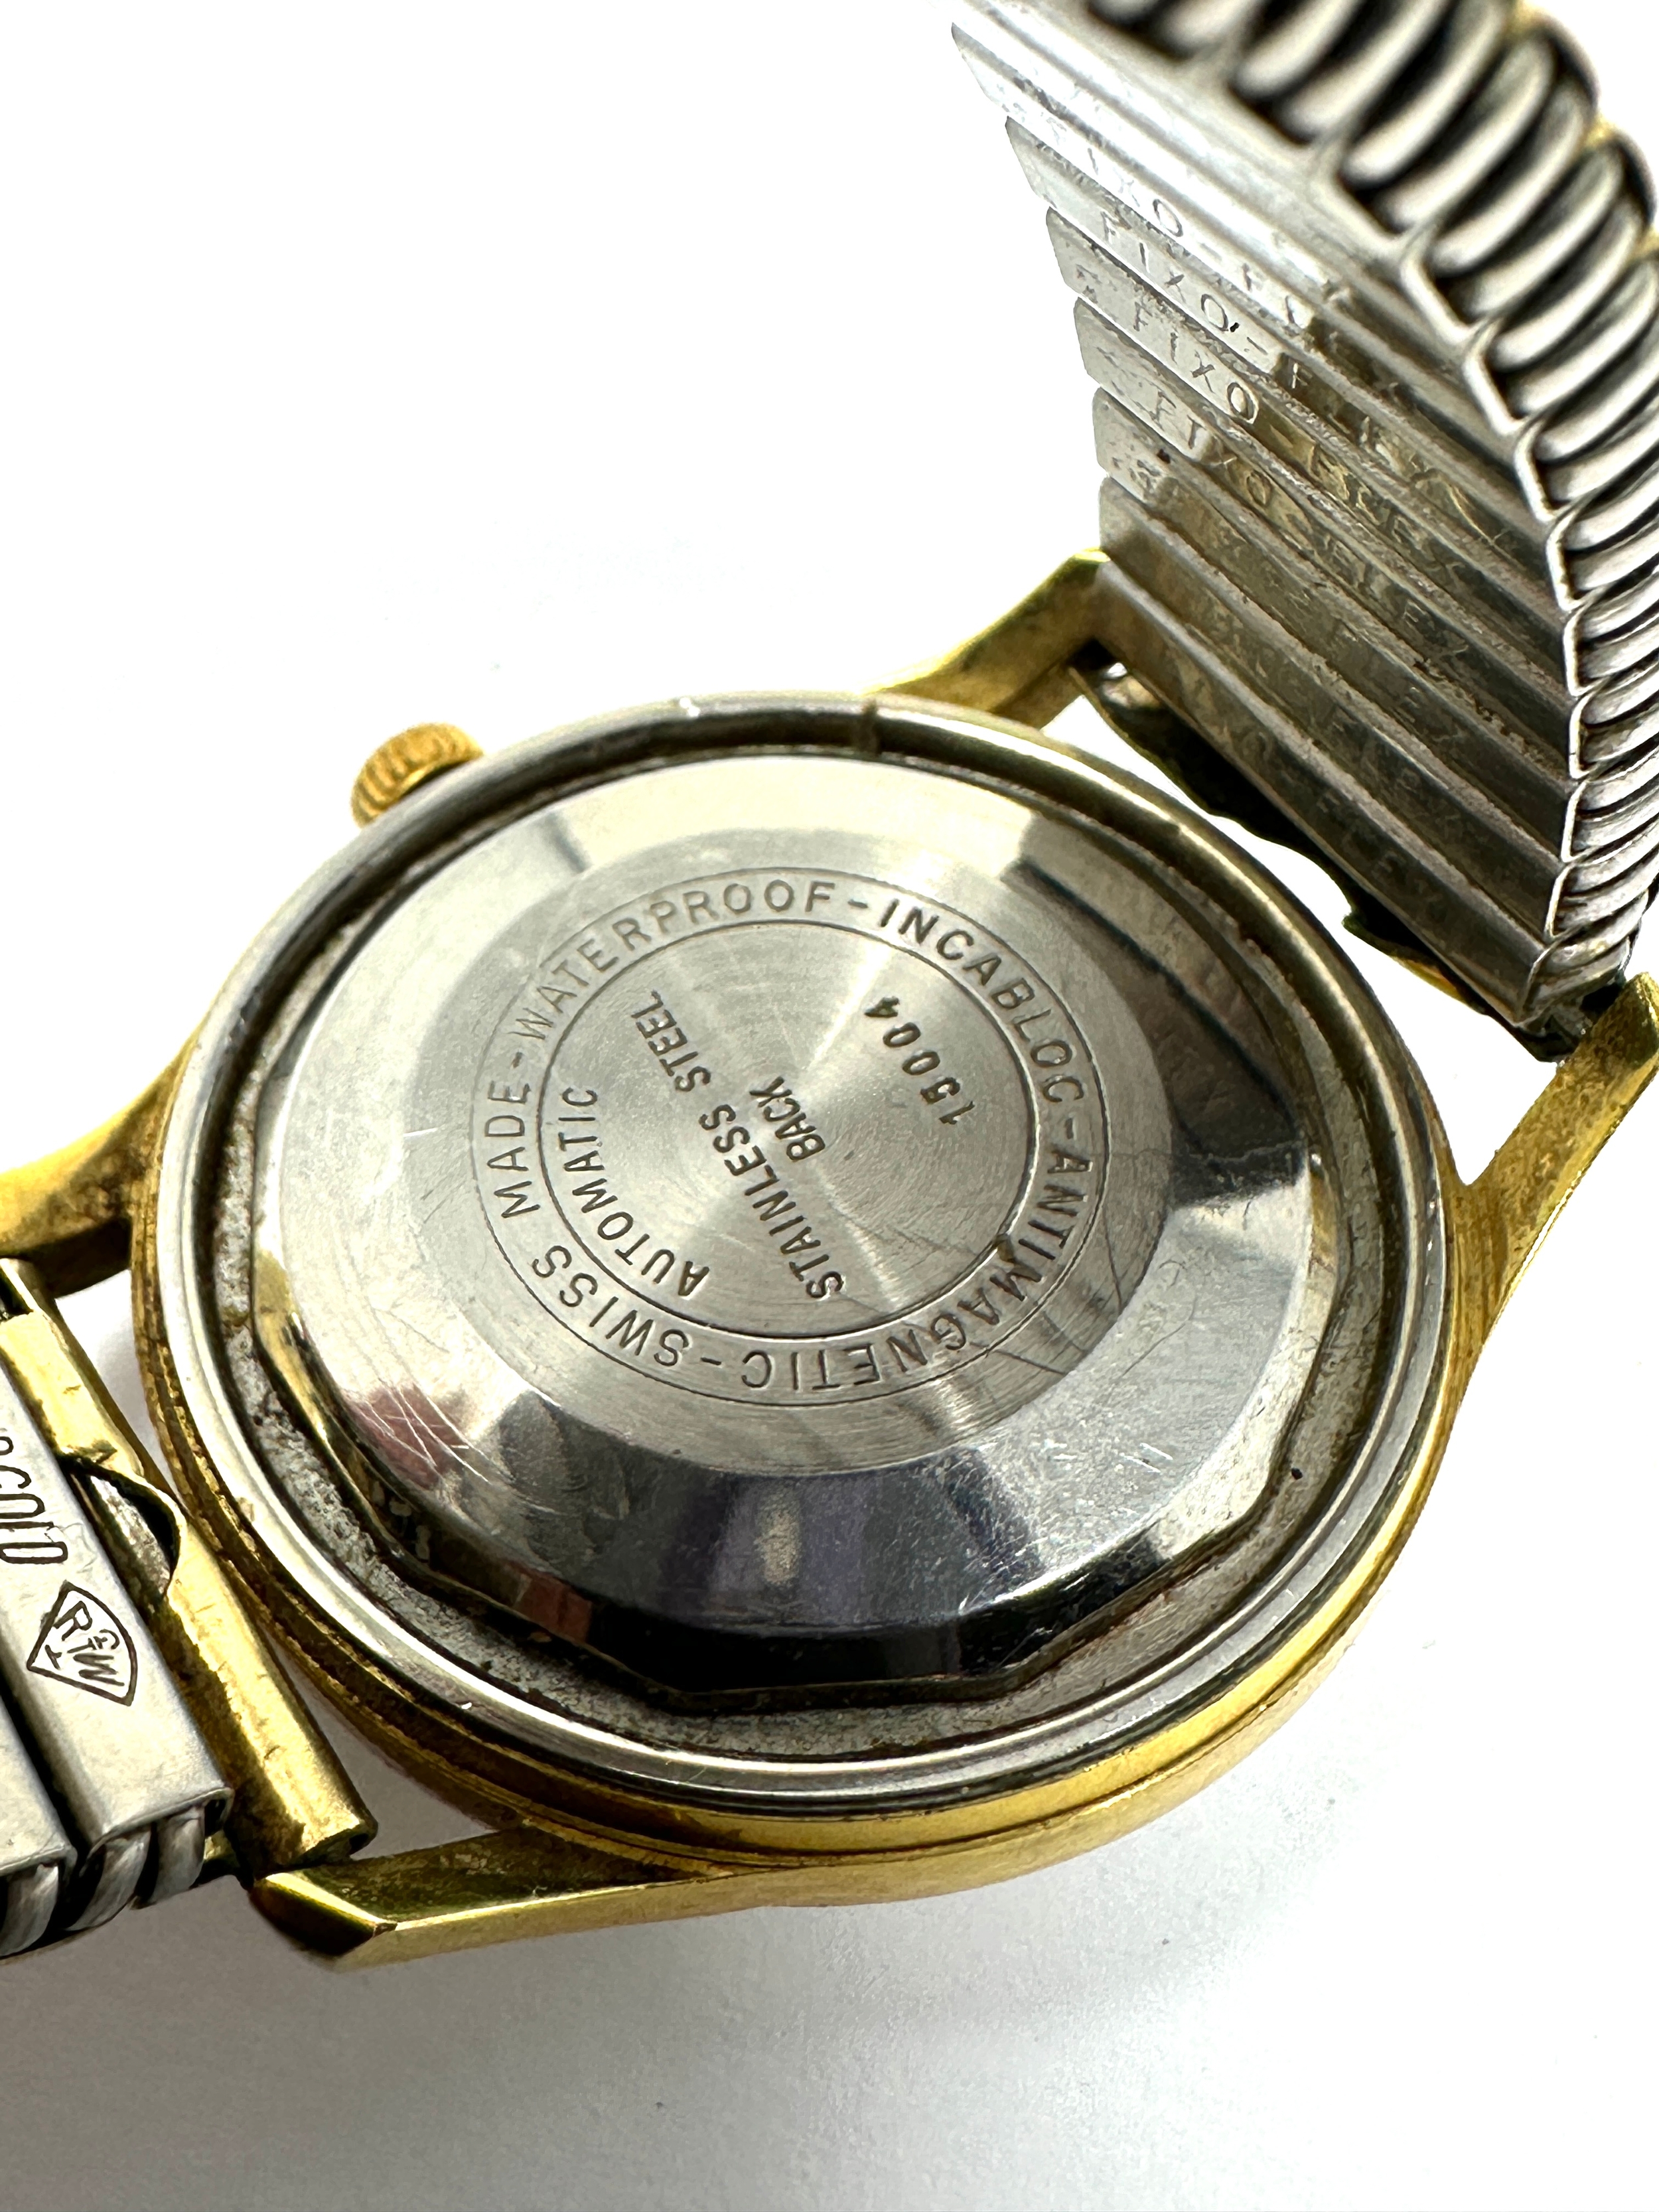 Vintage Avia Daytyme Automatic Day & Date Swiss Watch 25 Jewels the watch is ticking - Image 4 of 4